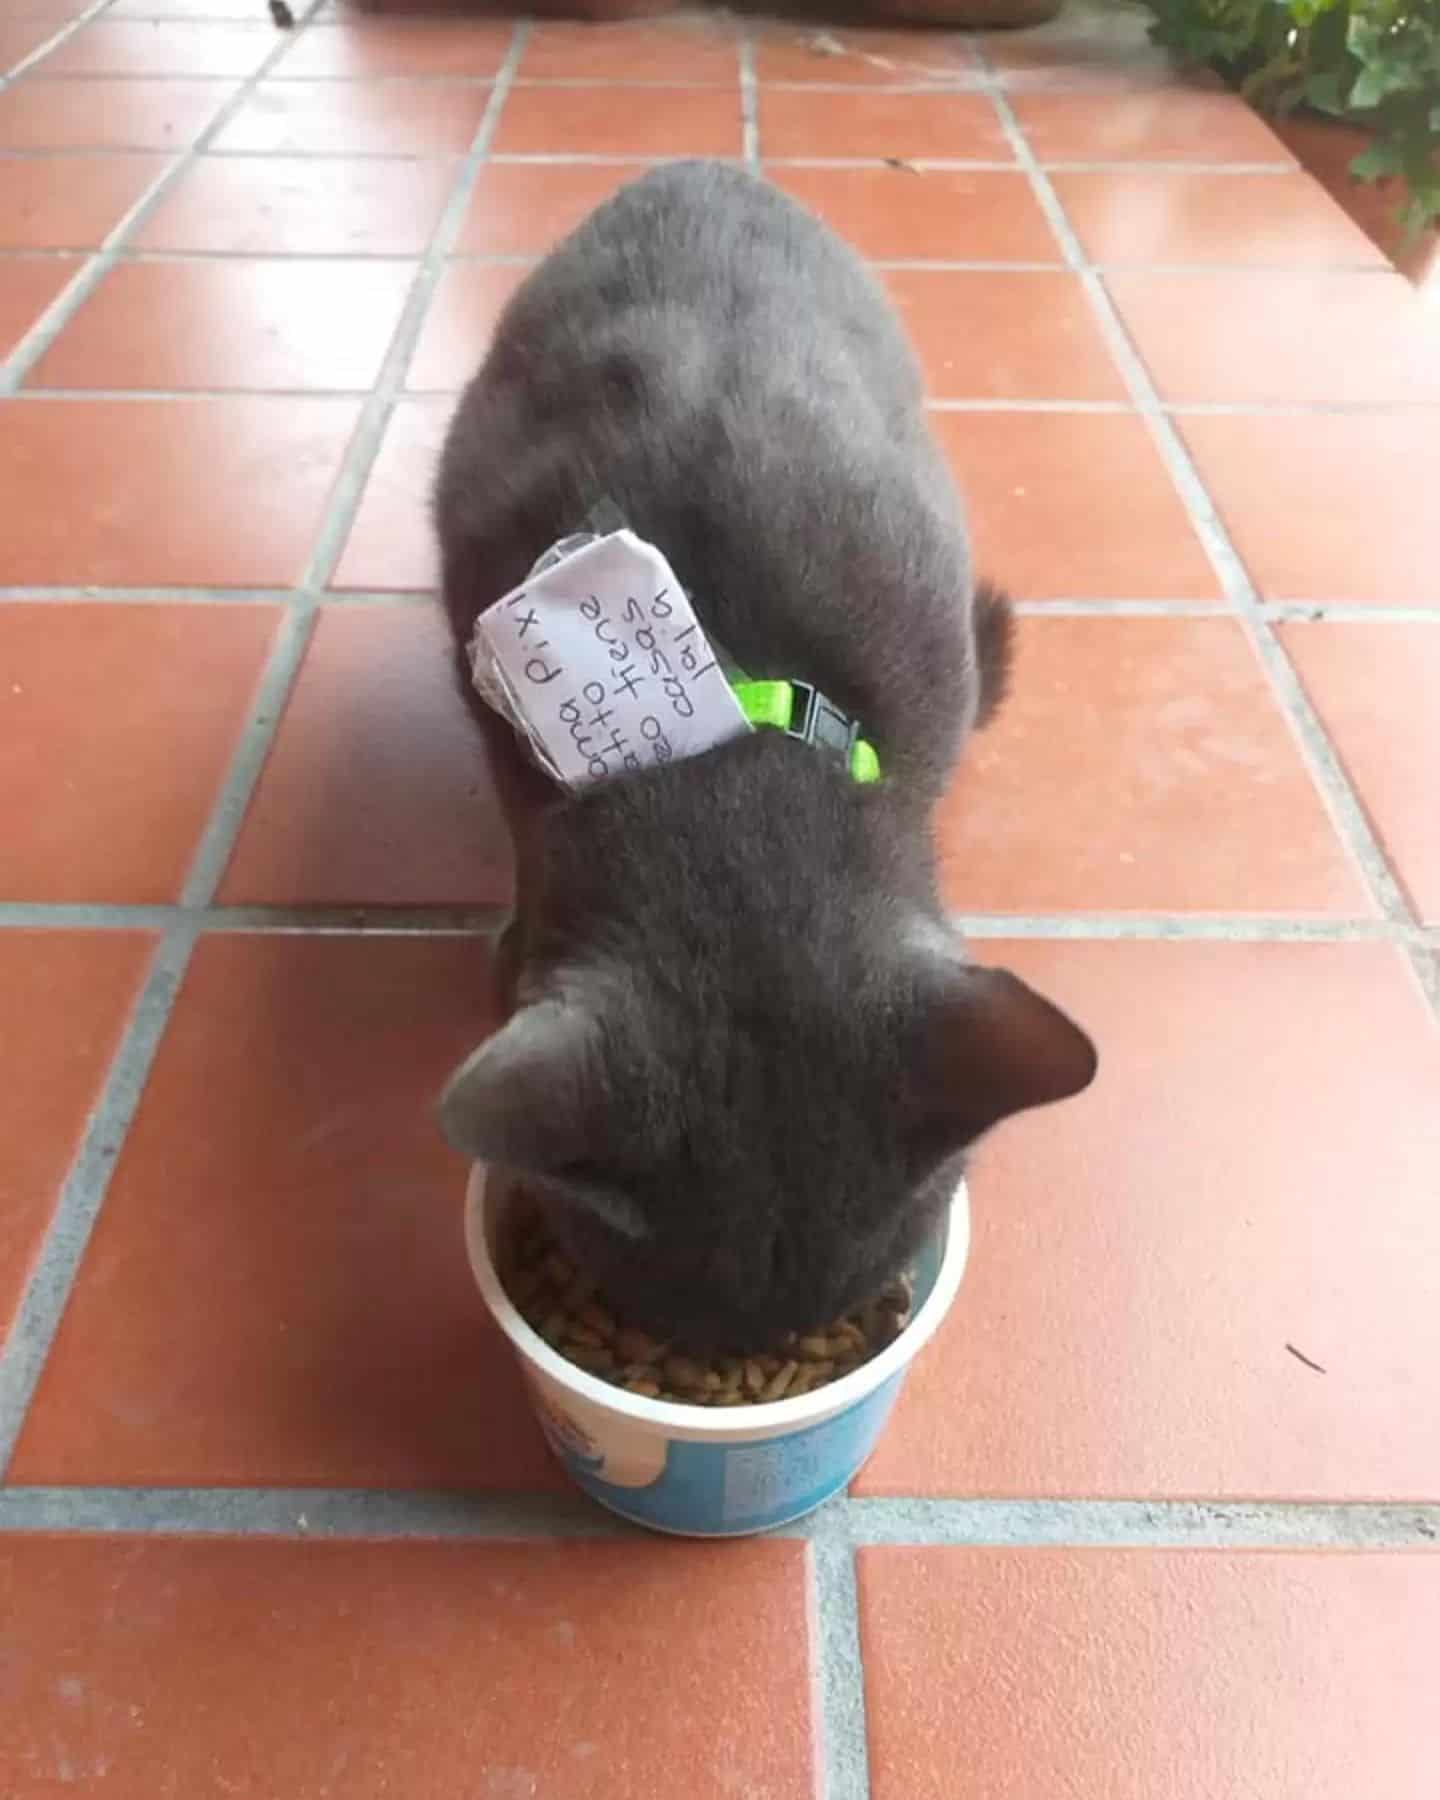 cat eating from a bowl